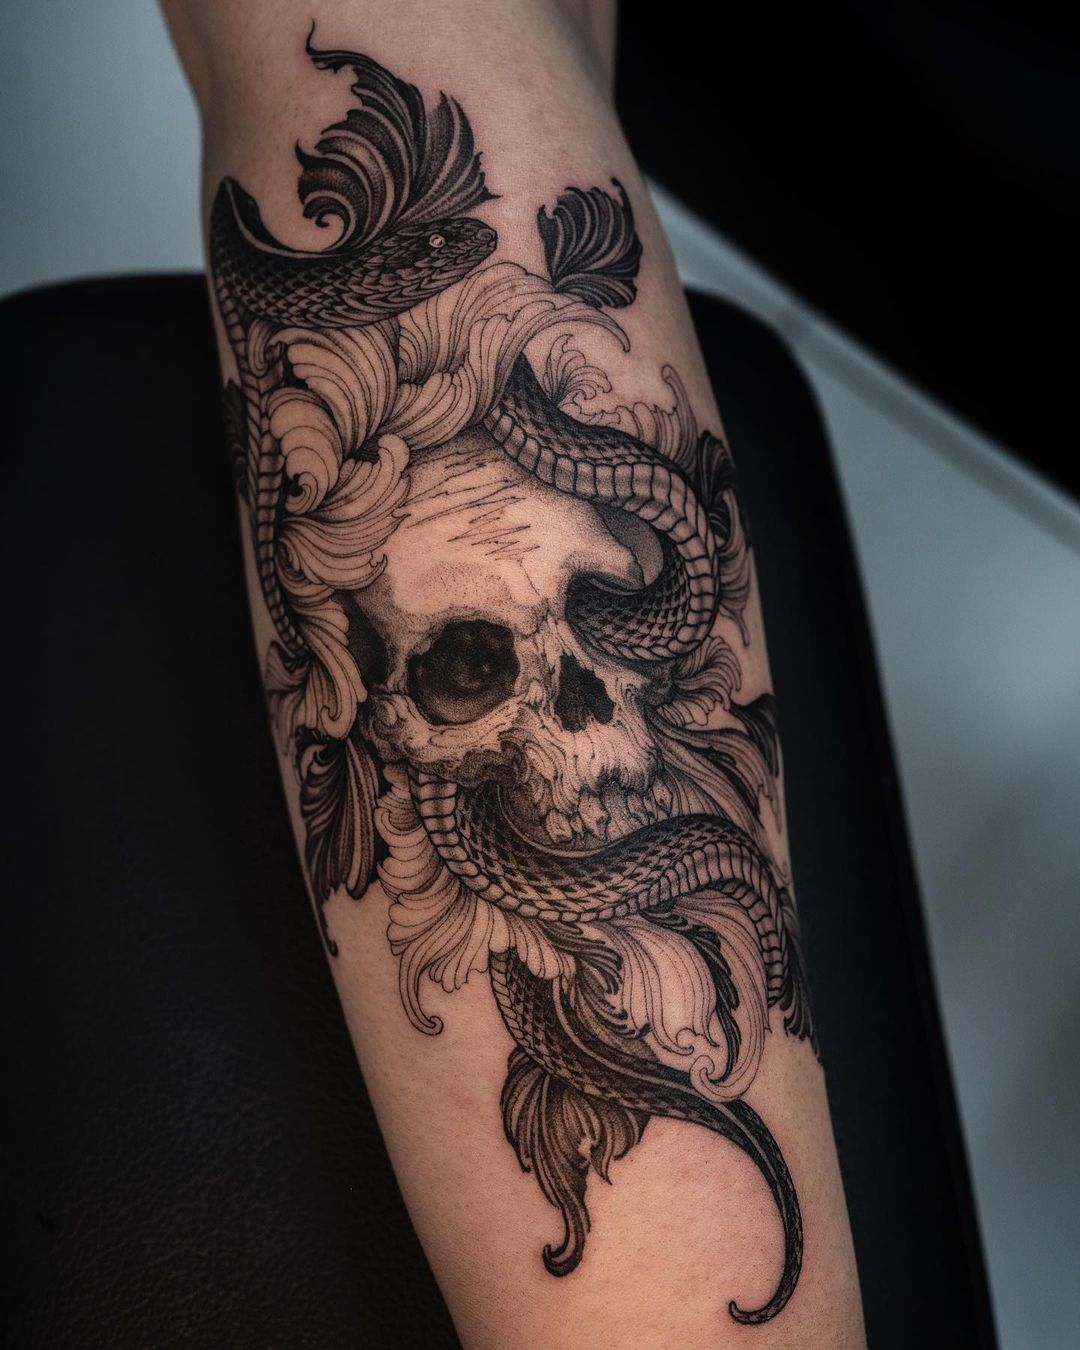 Trendy Arm Tattoo Designs To Ink